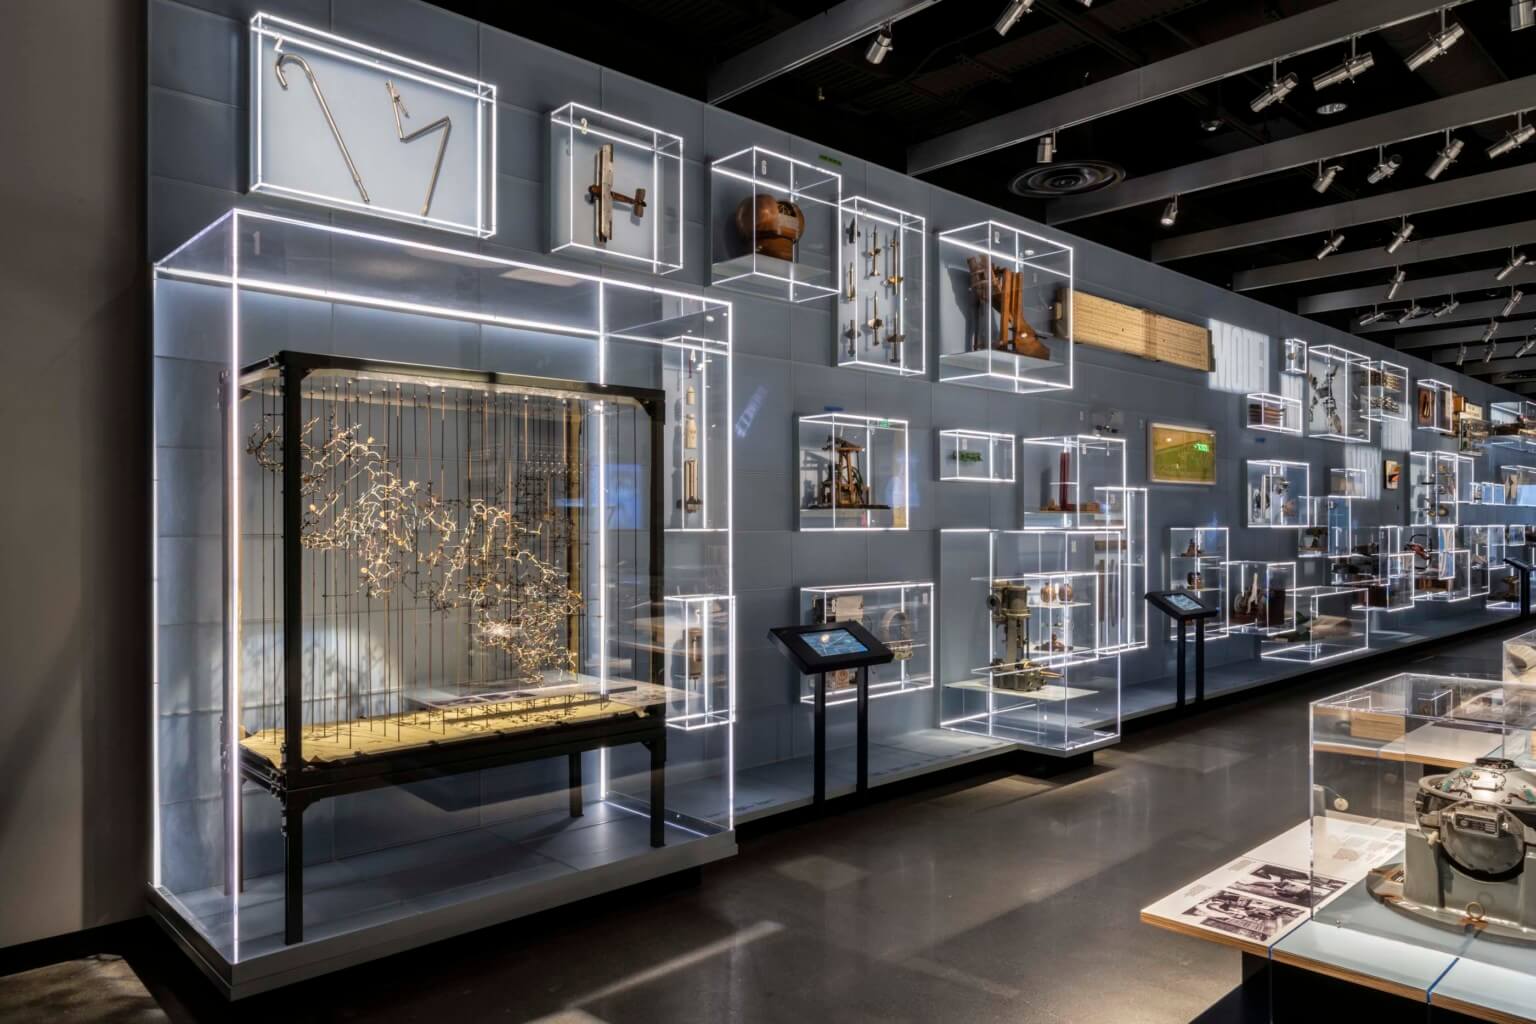 Höweler + Yoon design newly reopened and relocated MIT Museum